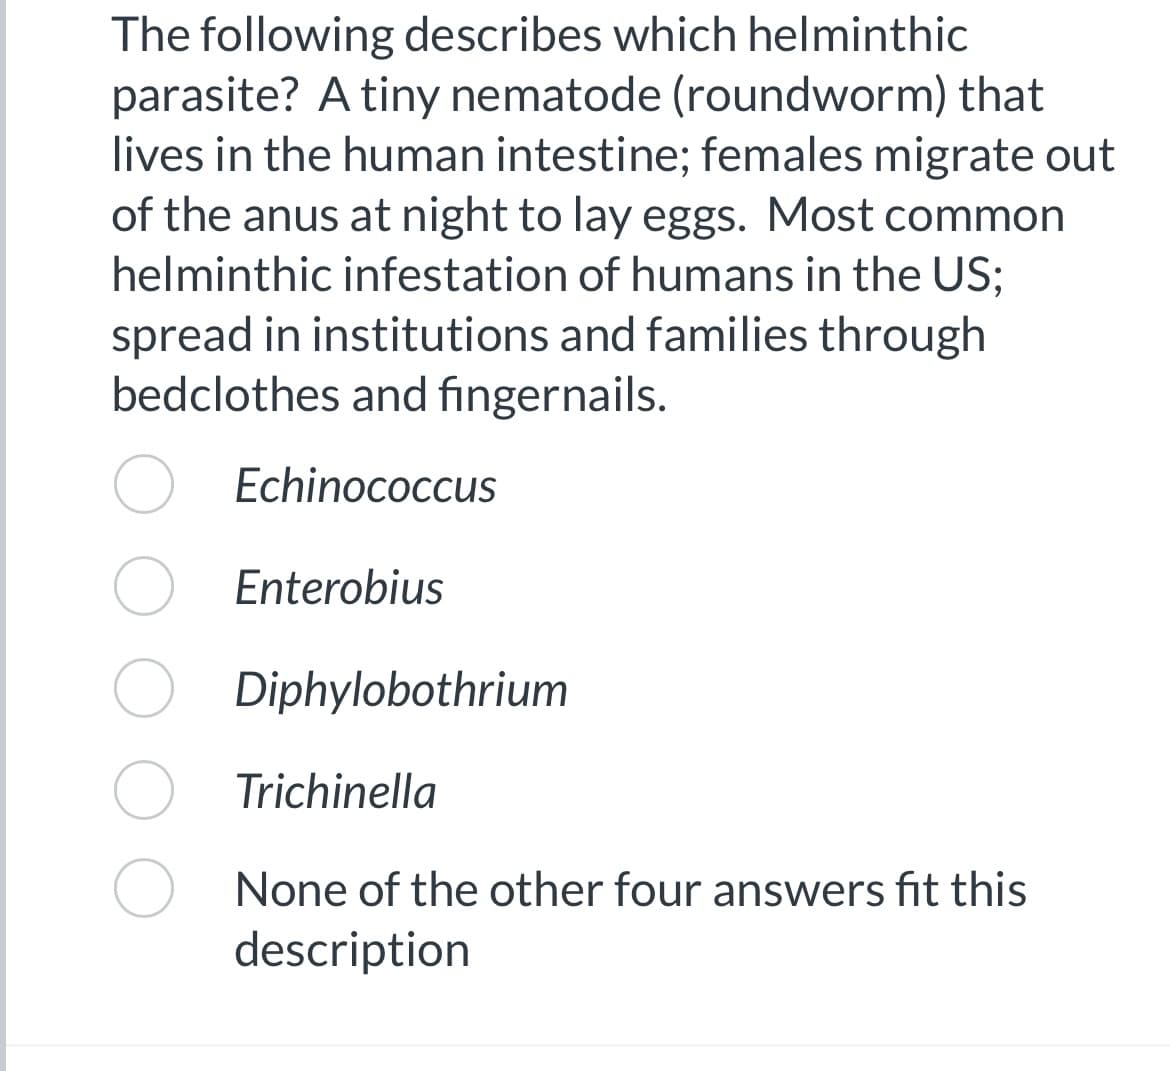 The following describes which helminthic
parasite? A tiny nematode (roundworm) that
lives in the human intestine; females migrate out
of the anus at night to lay eggs. Most common
helminthic infestation of humans in the US;
spread in institutions and families through
bedclothes and fingernails.
Echinococcus
Enterobius
Diphylobothrium
Trichinella
None of the other four answers fit this
description